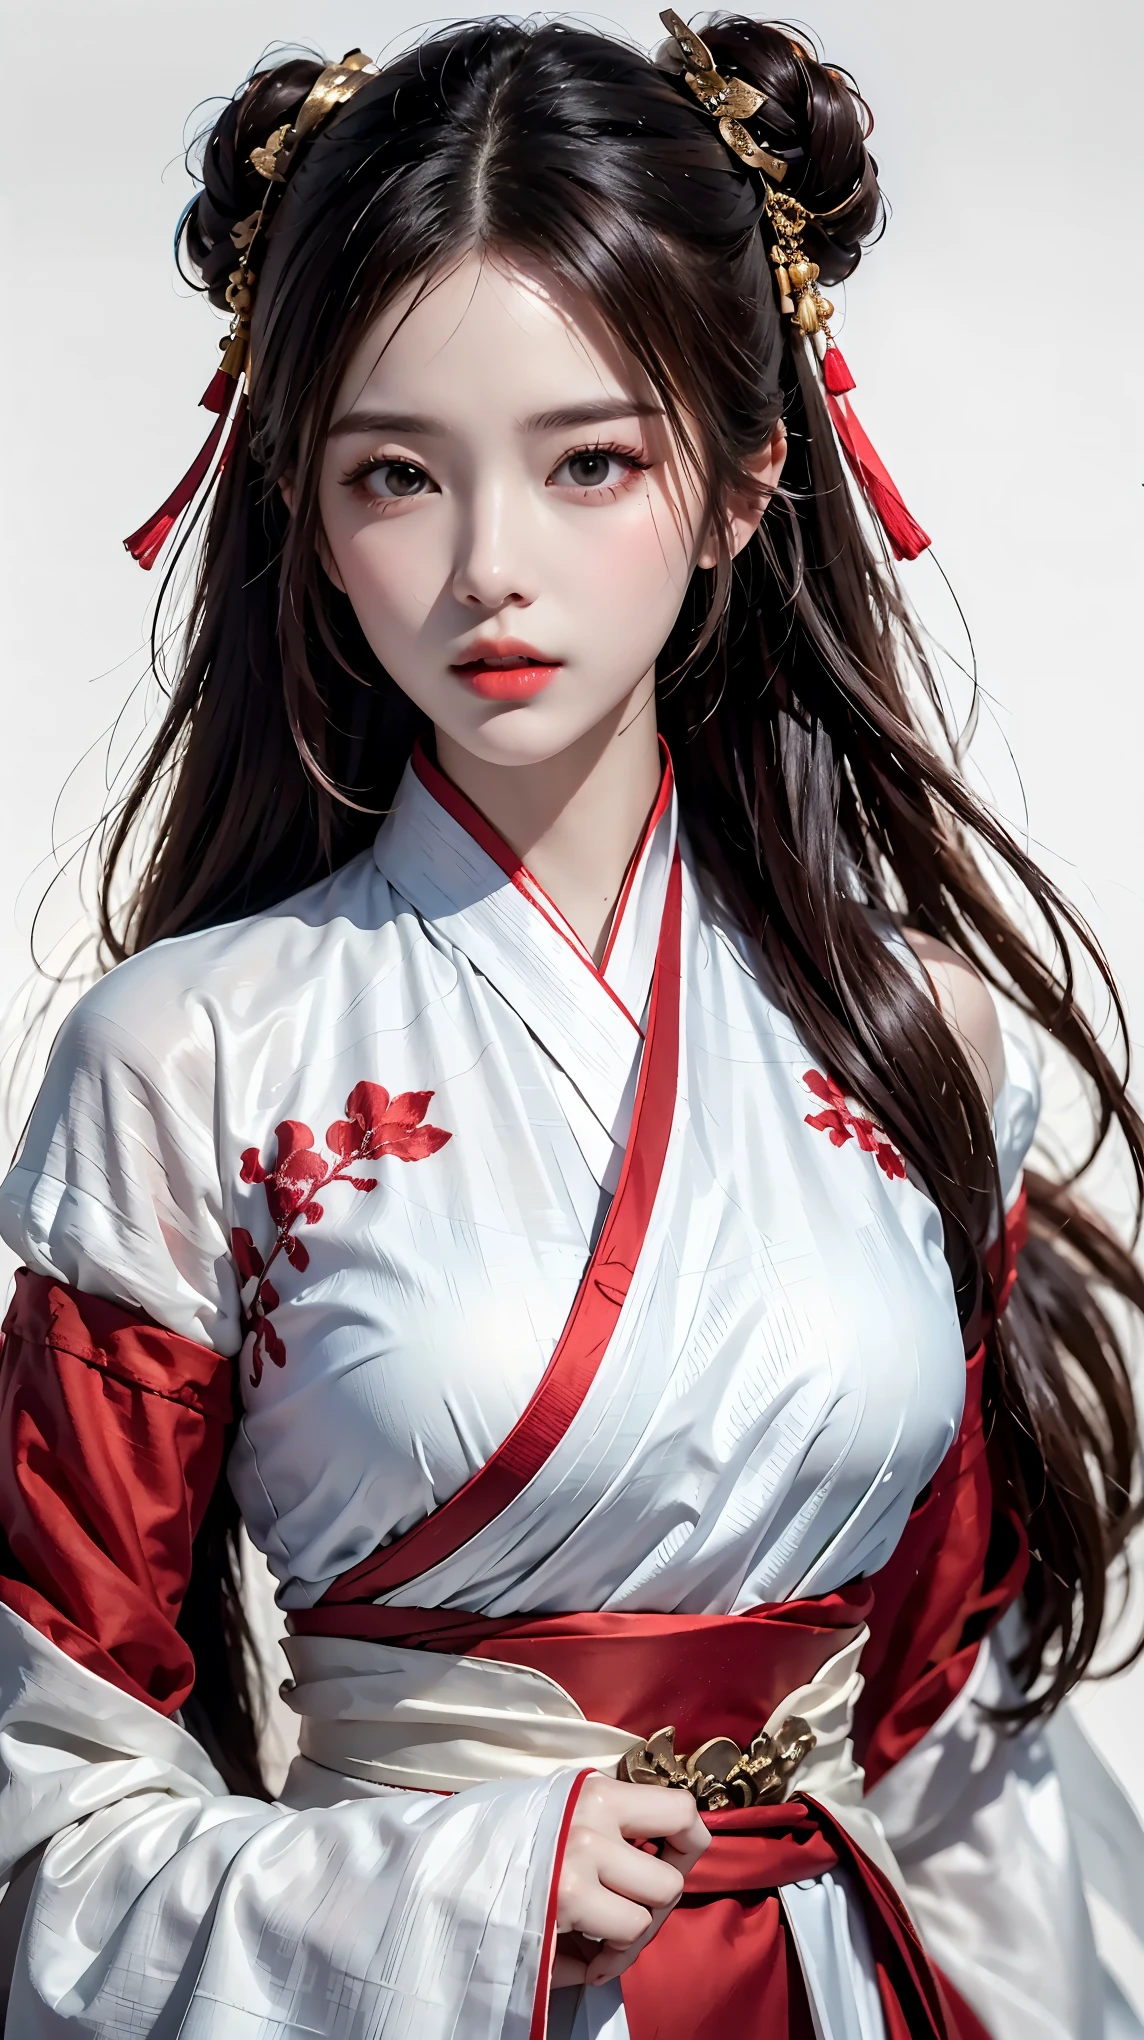 1 girl, woman, handsome, ink, Chinese armor, ((2.5D)), black hair, floating hair, delicate eyes, black and red antique damask Hanfu, fov, (f1.8), (masterpiece), (portrait shot), front shot, white background, (movie poster)